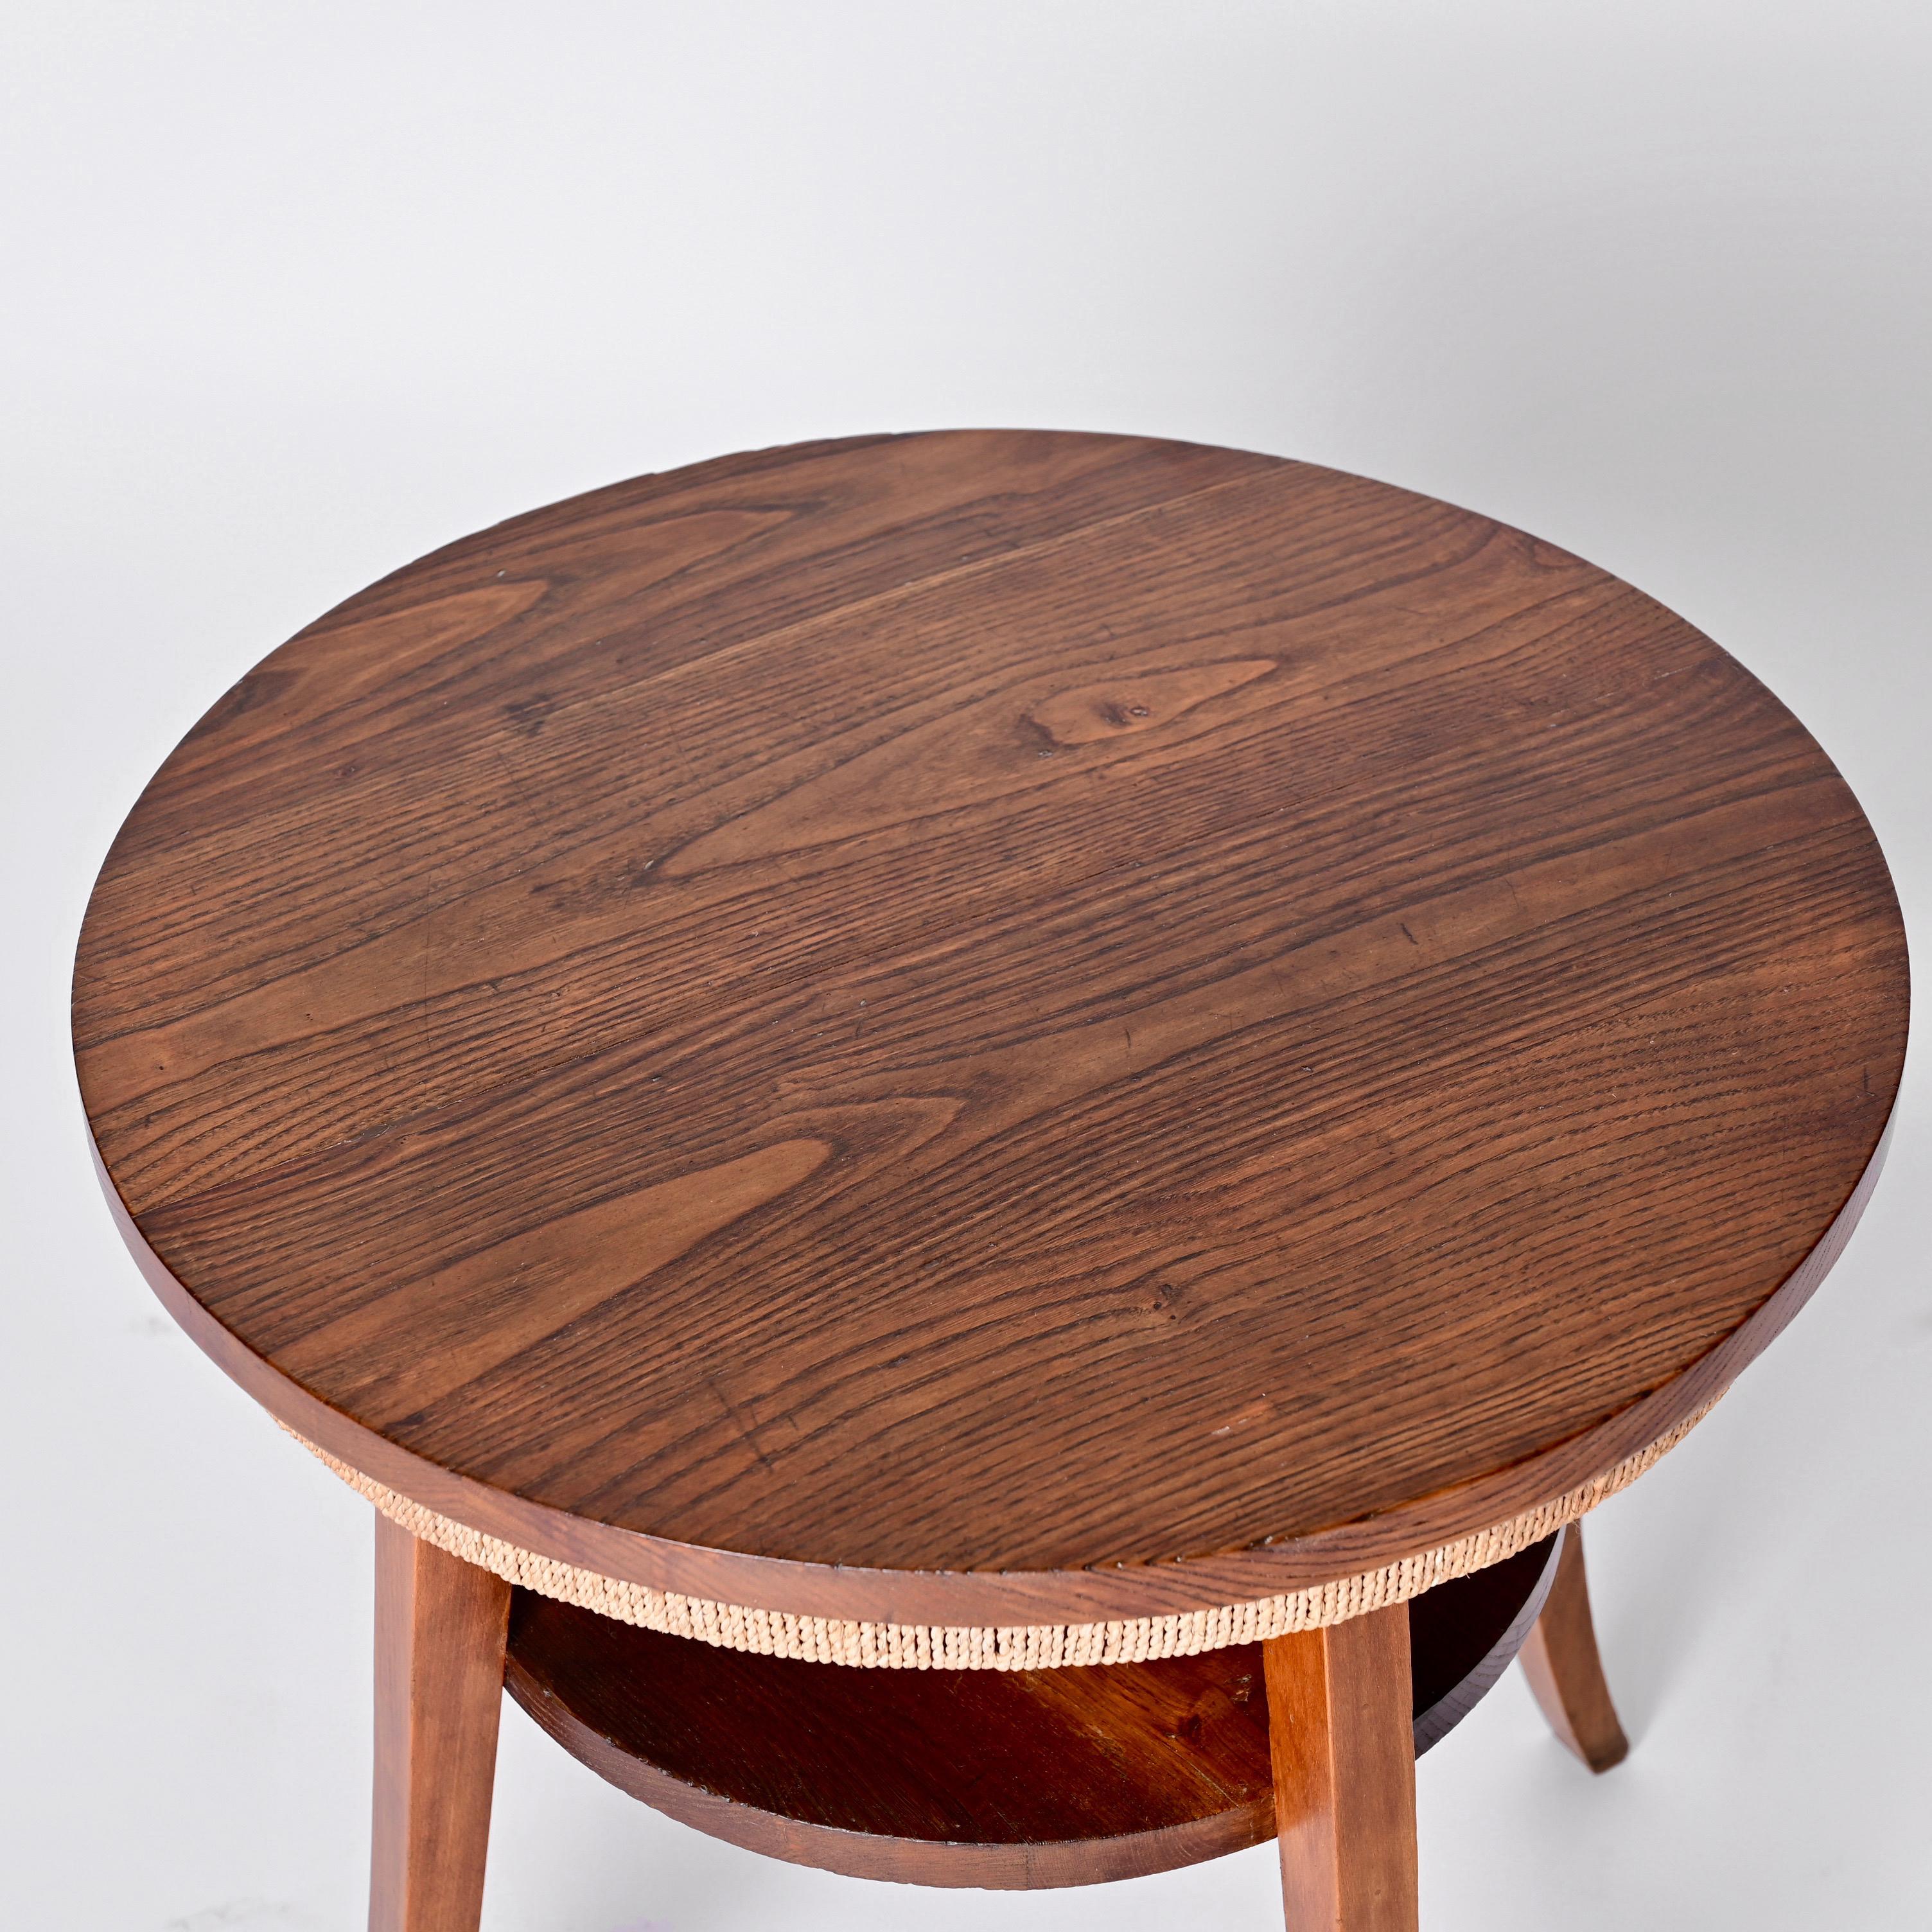 Midcentury Two-Tier Round Rope and Chestnut Wood Italian Coffee Table, 1950s For Sale 5